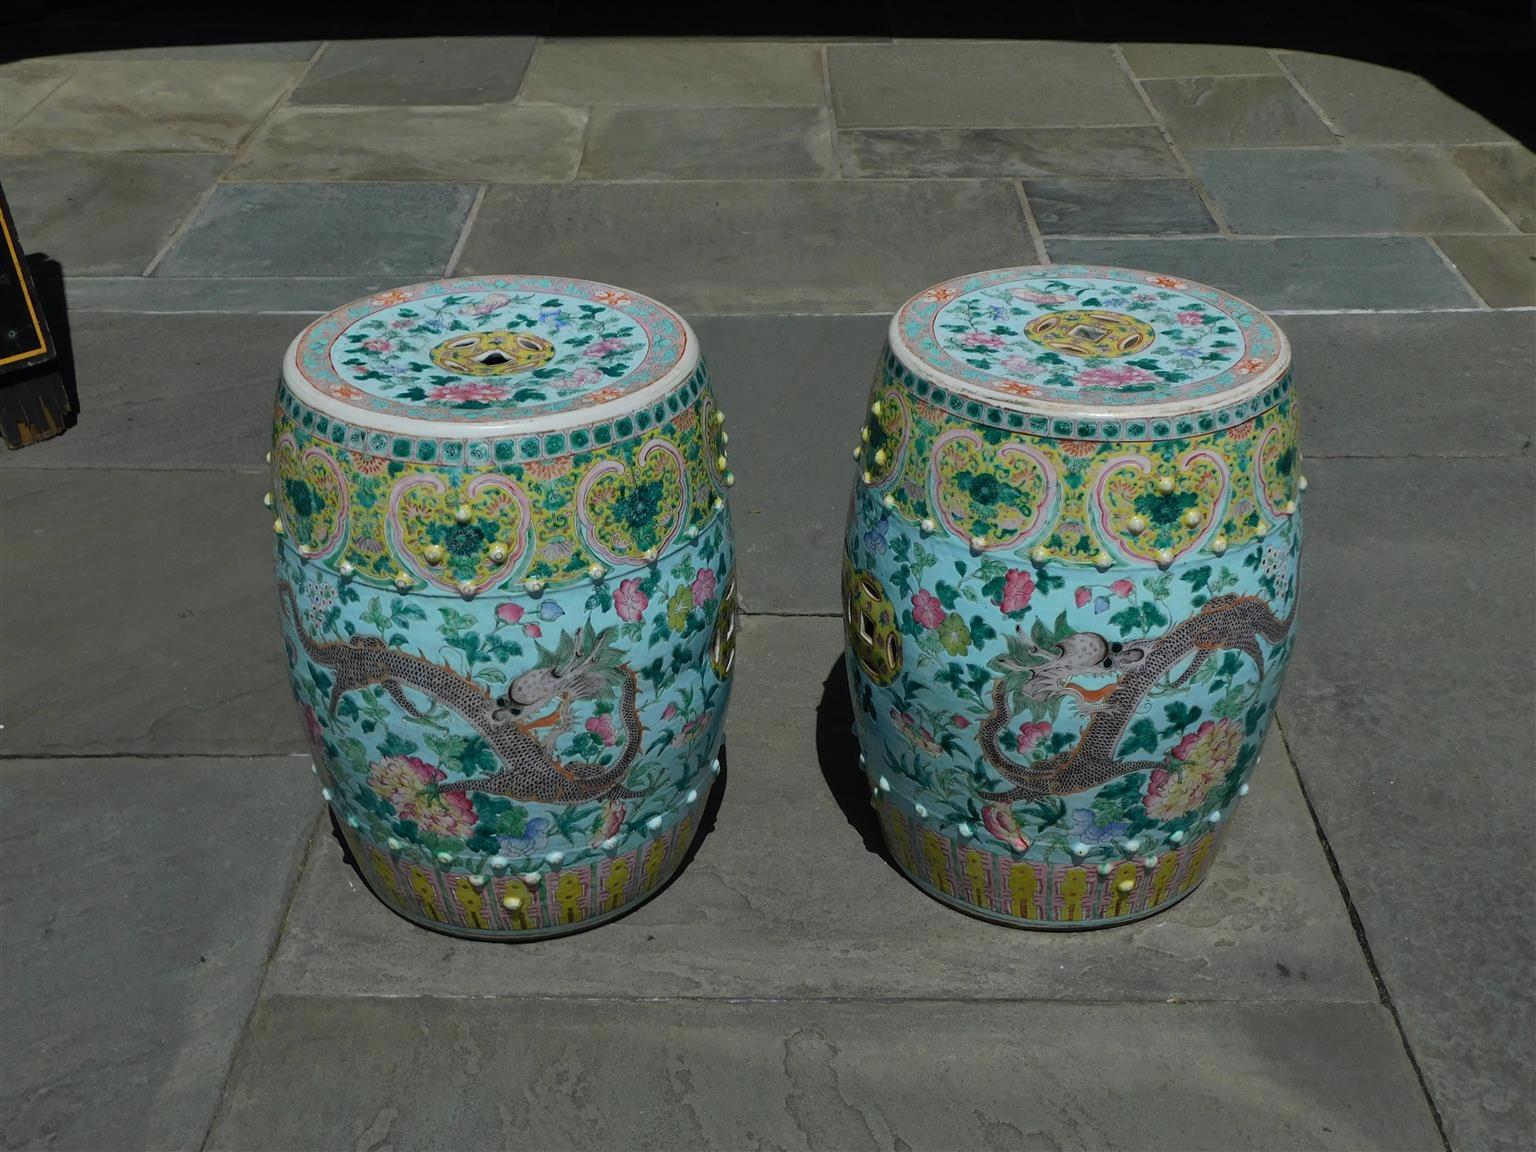 Pair of Chinese Porcelain Painted Garden Seats w/ Dragons & Exotic Birds, C 1820 For Sale 2